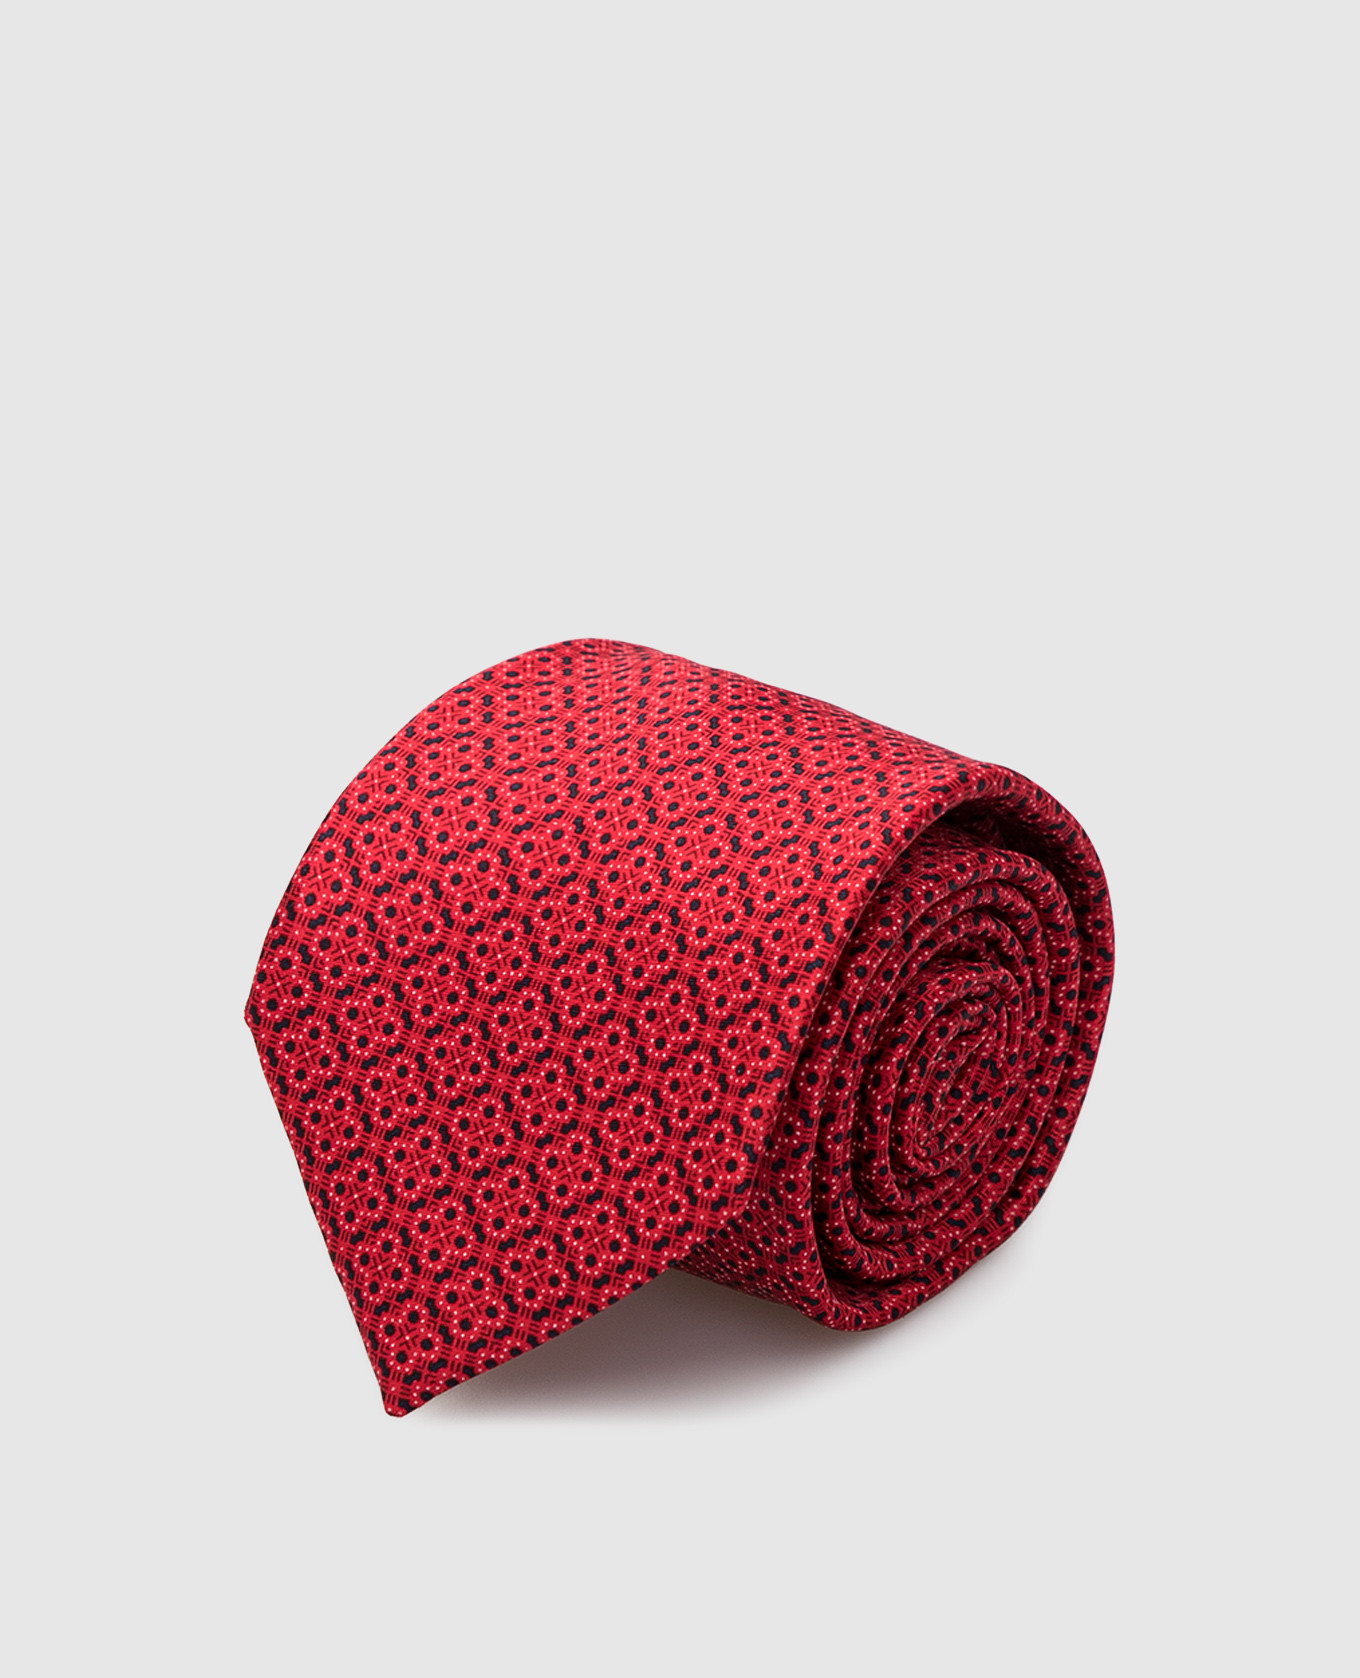 Children's red silk set of patterned tie and shawl